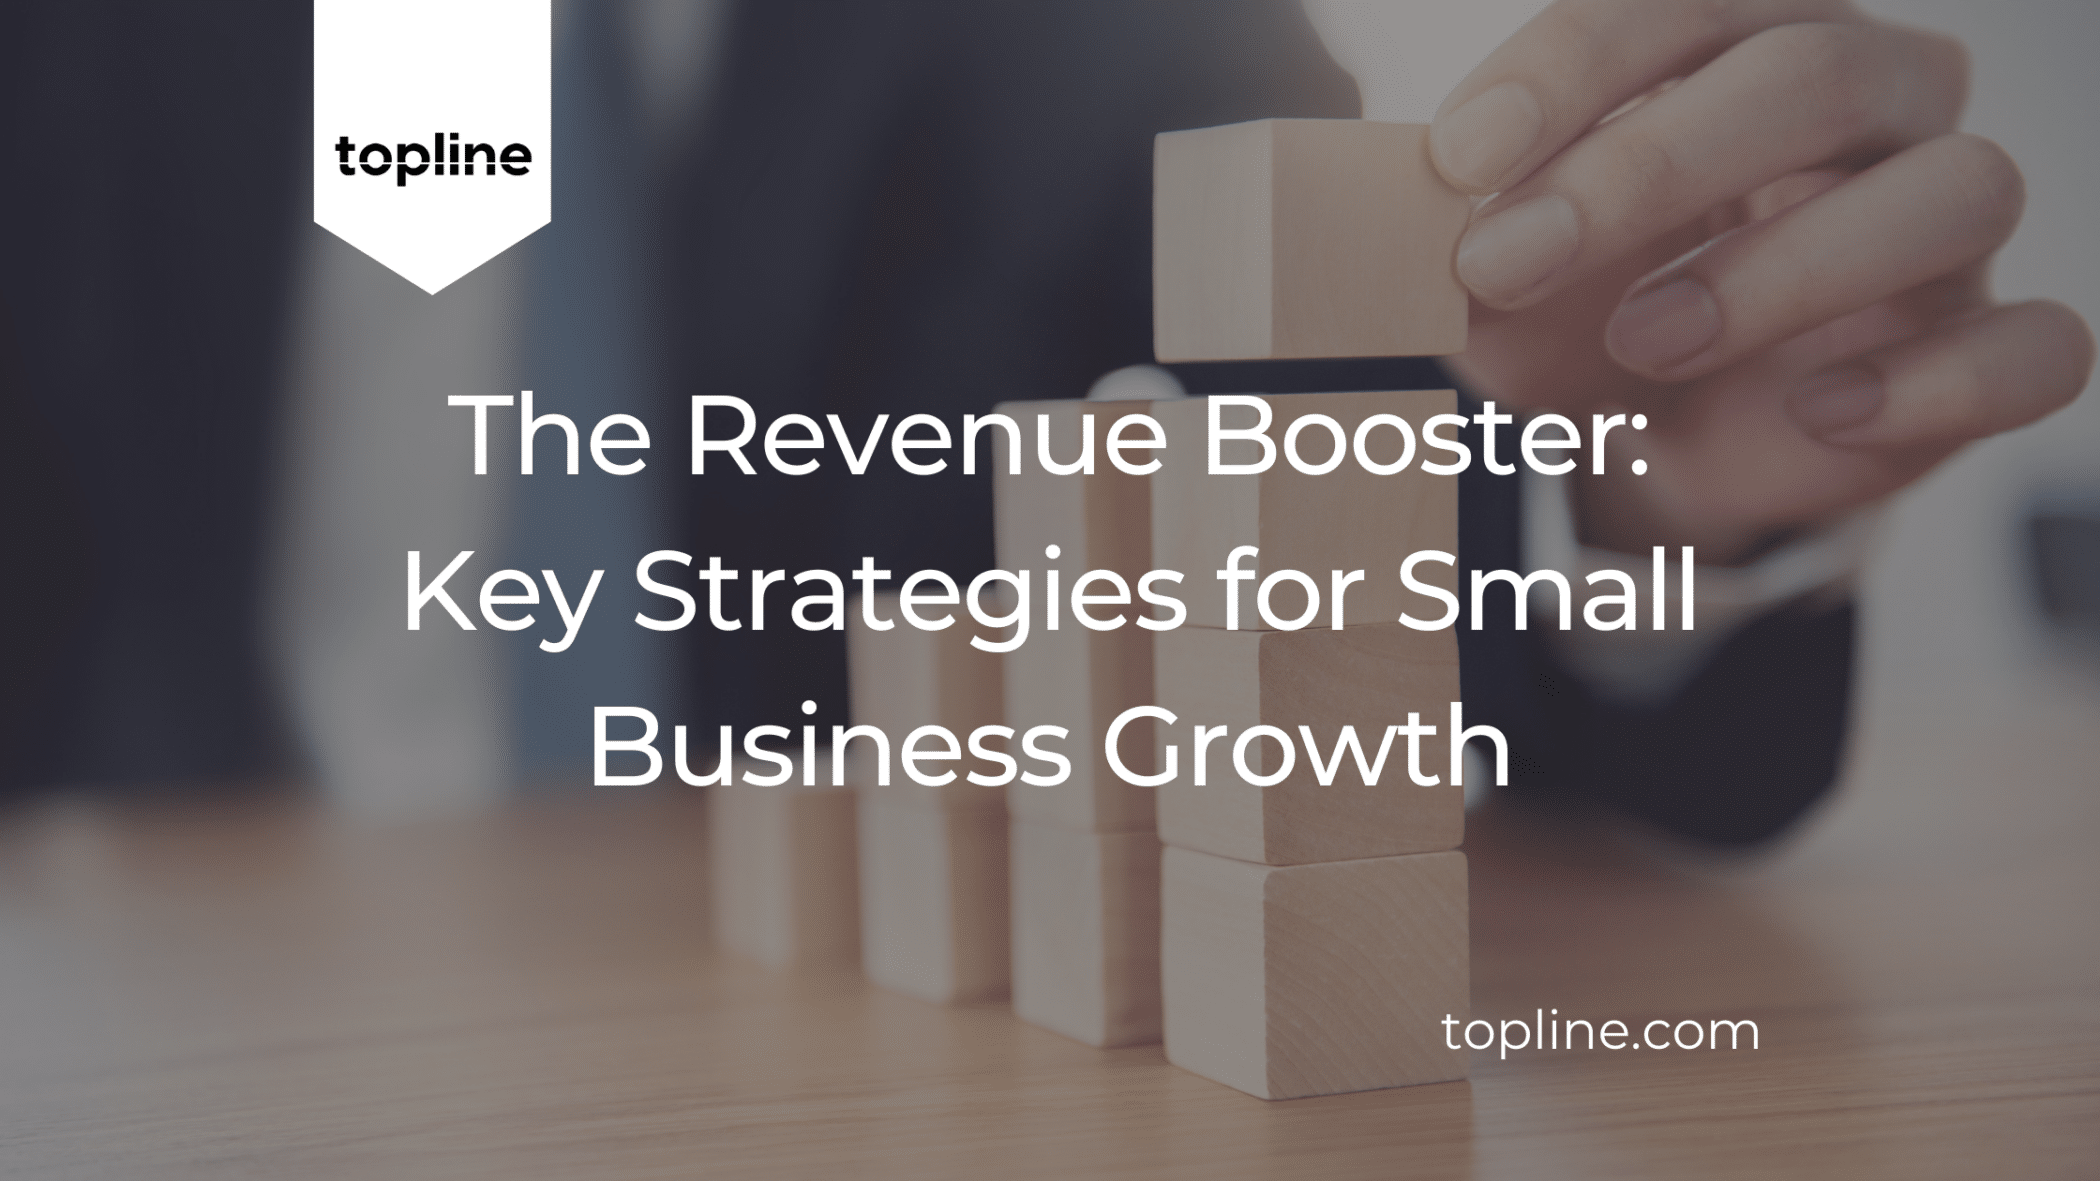 The Revenue Booster: Key Strategies for Small Business Growth